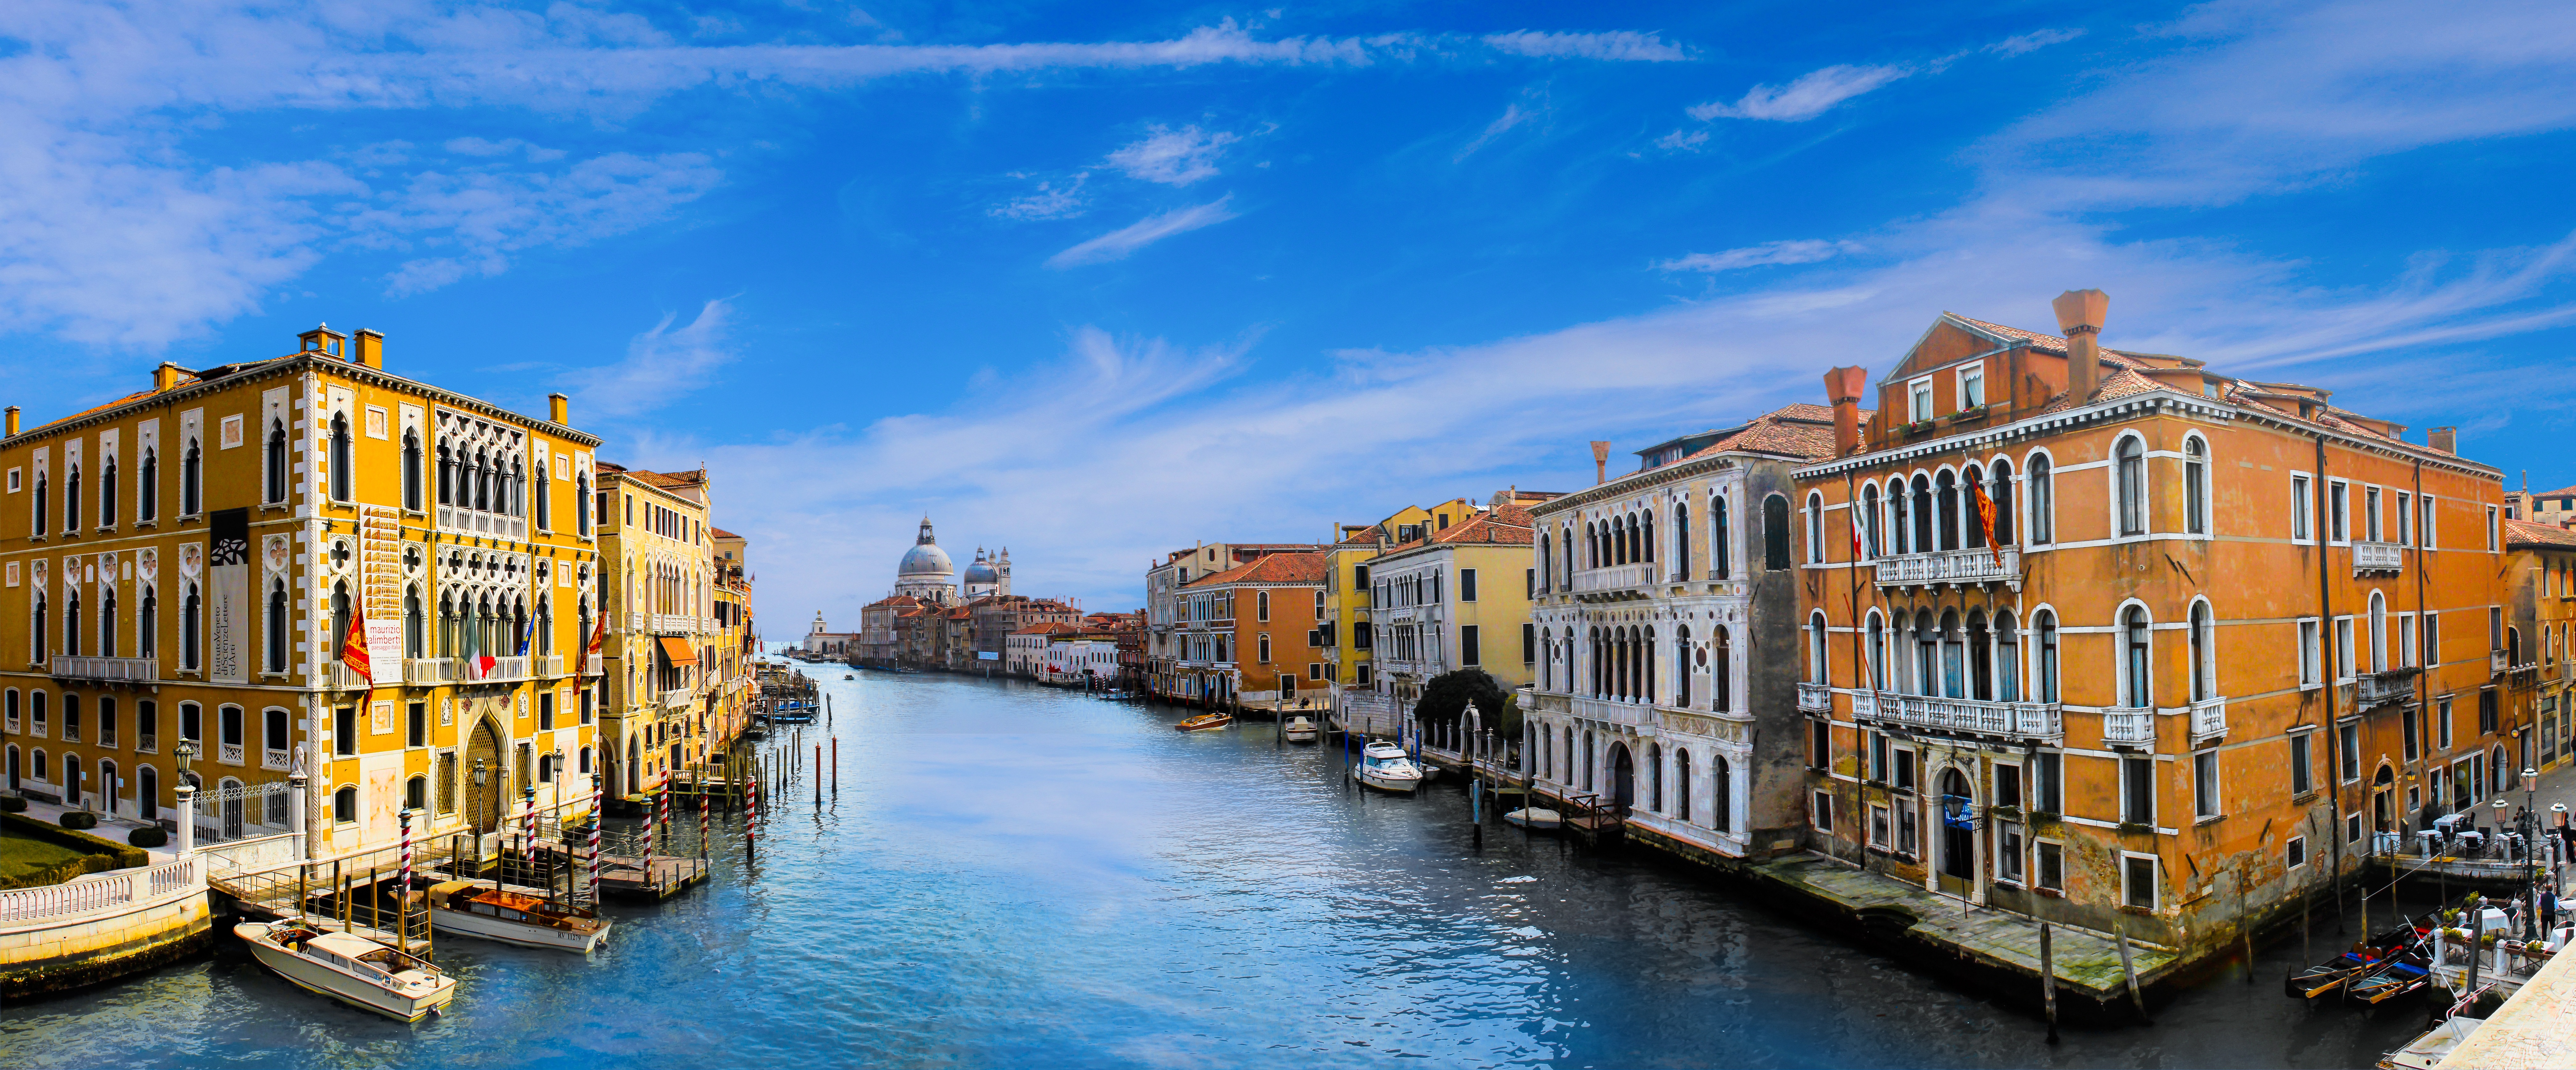 Wallpapers Venice Italy Grand canal in Venice on the desktop